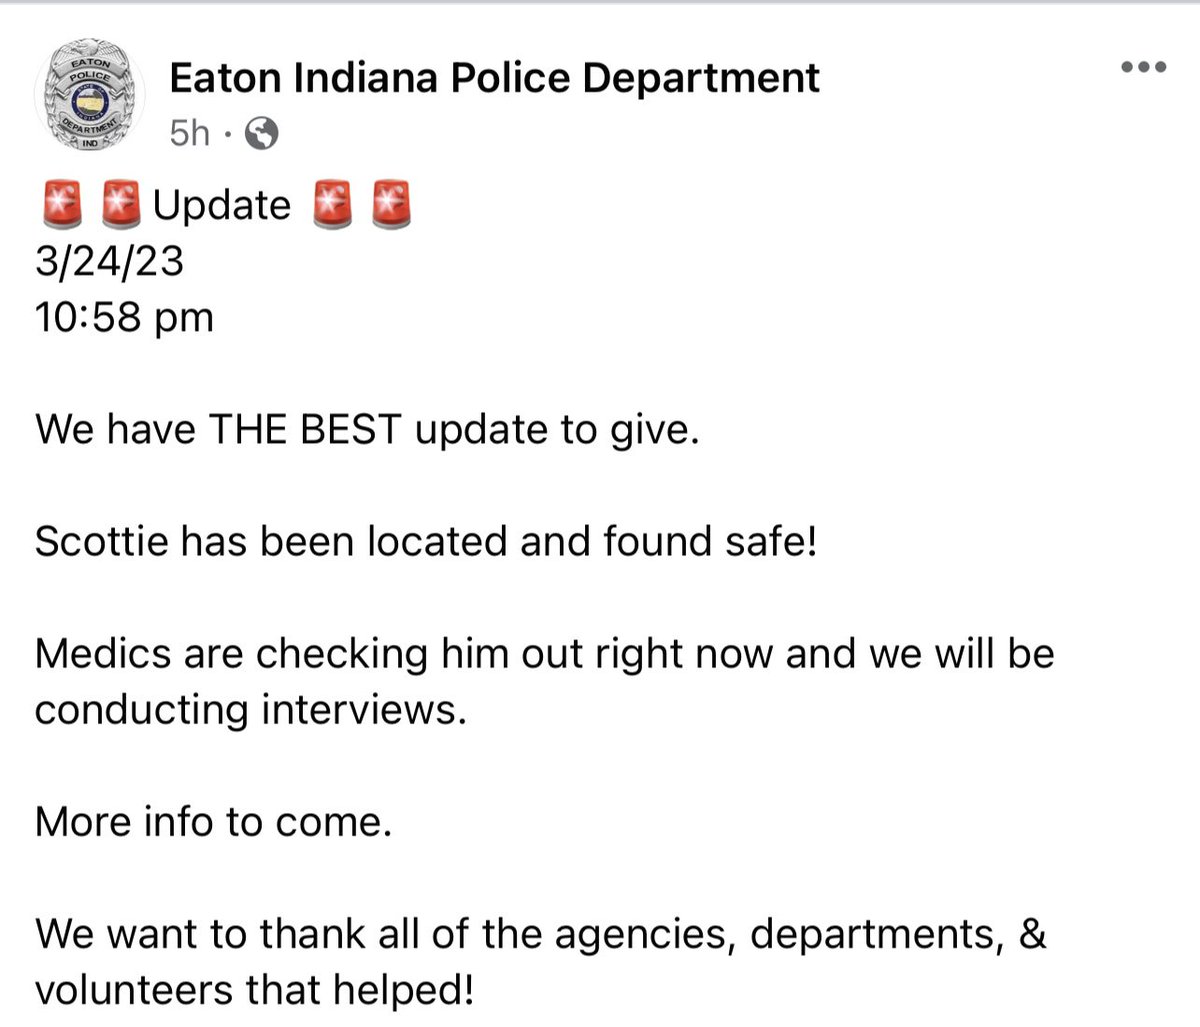 This is without a doubt the best news to wake up to! #ScottieMorris has been found safe 🥹 wonderful job by the Eaton Indiana Police Department for their dedication to Scottie the past 9 days! I pray that he continues to get the support he needs 💖 #ScottieMorrisfound